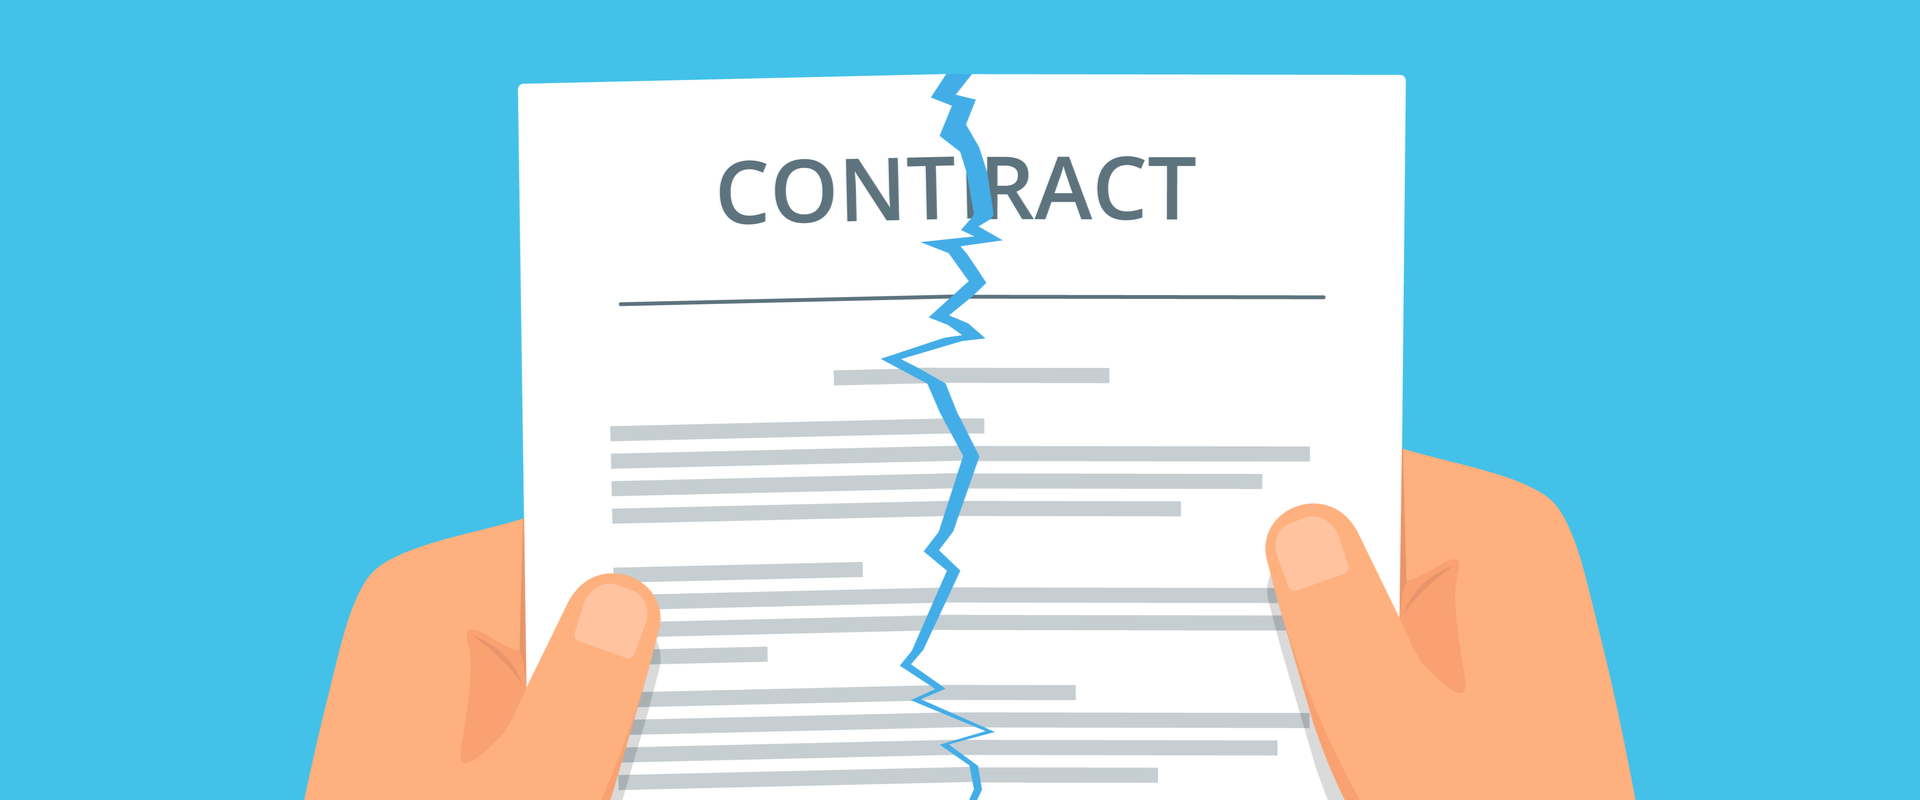 Breach of Contract. Remedies for Breach of Contract. Контракт jpeg. Contract фотошоп.